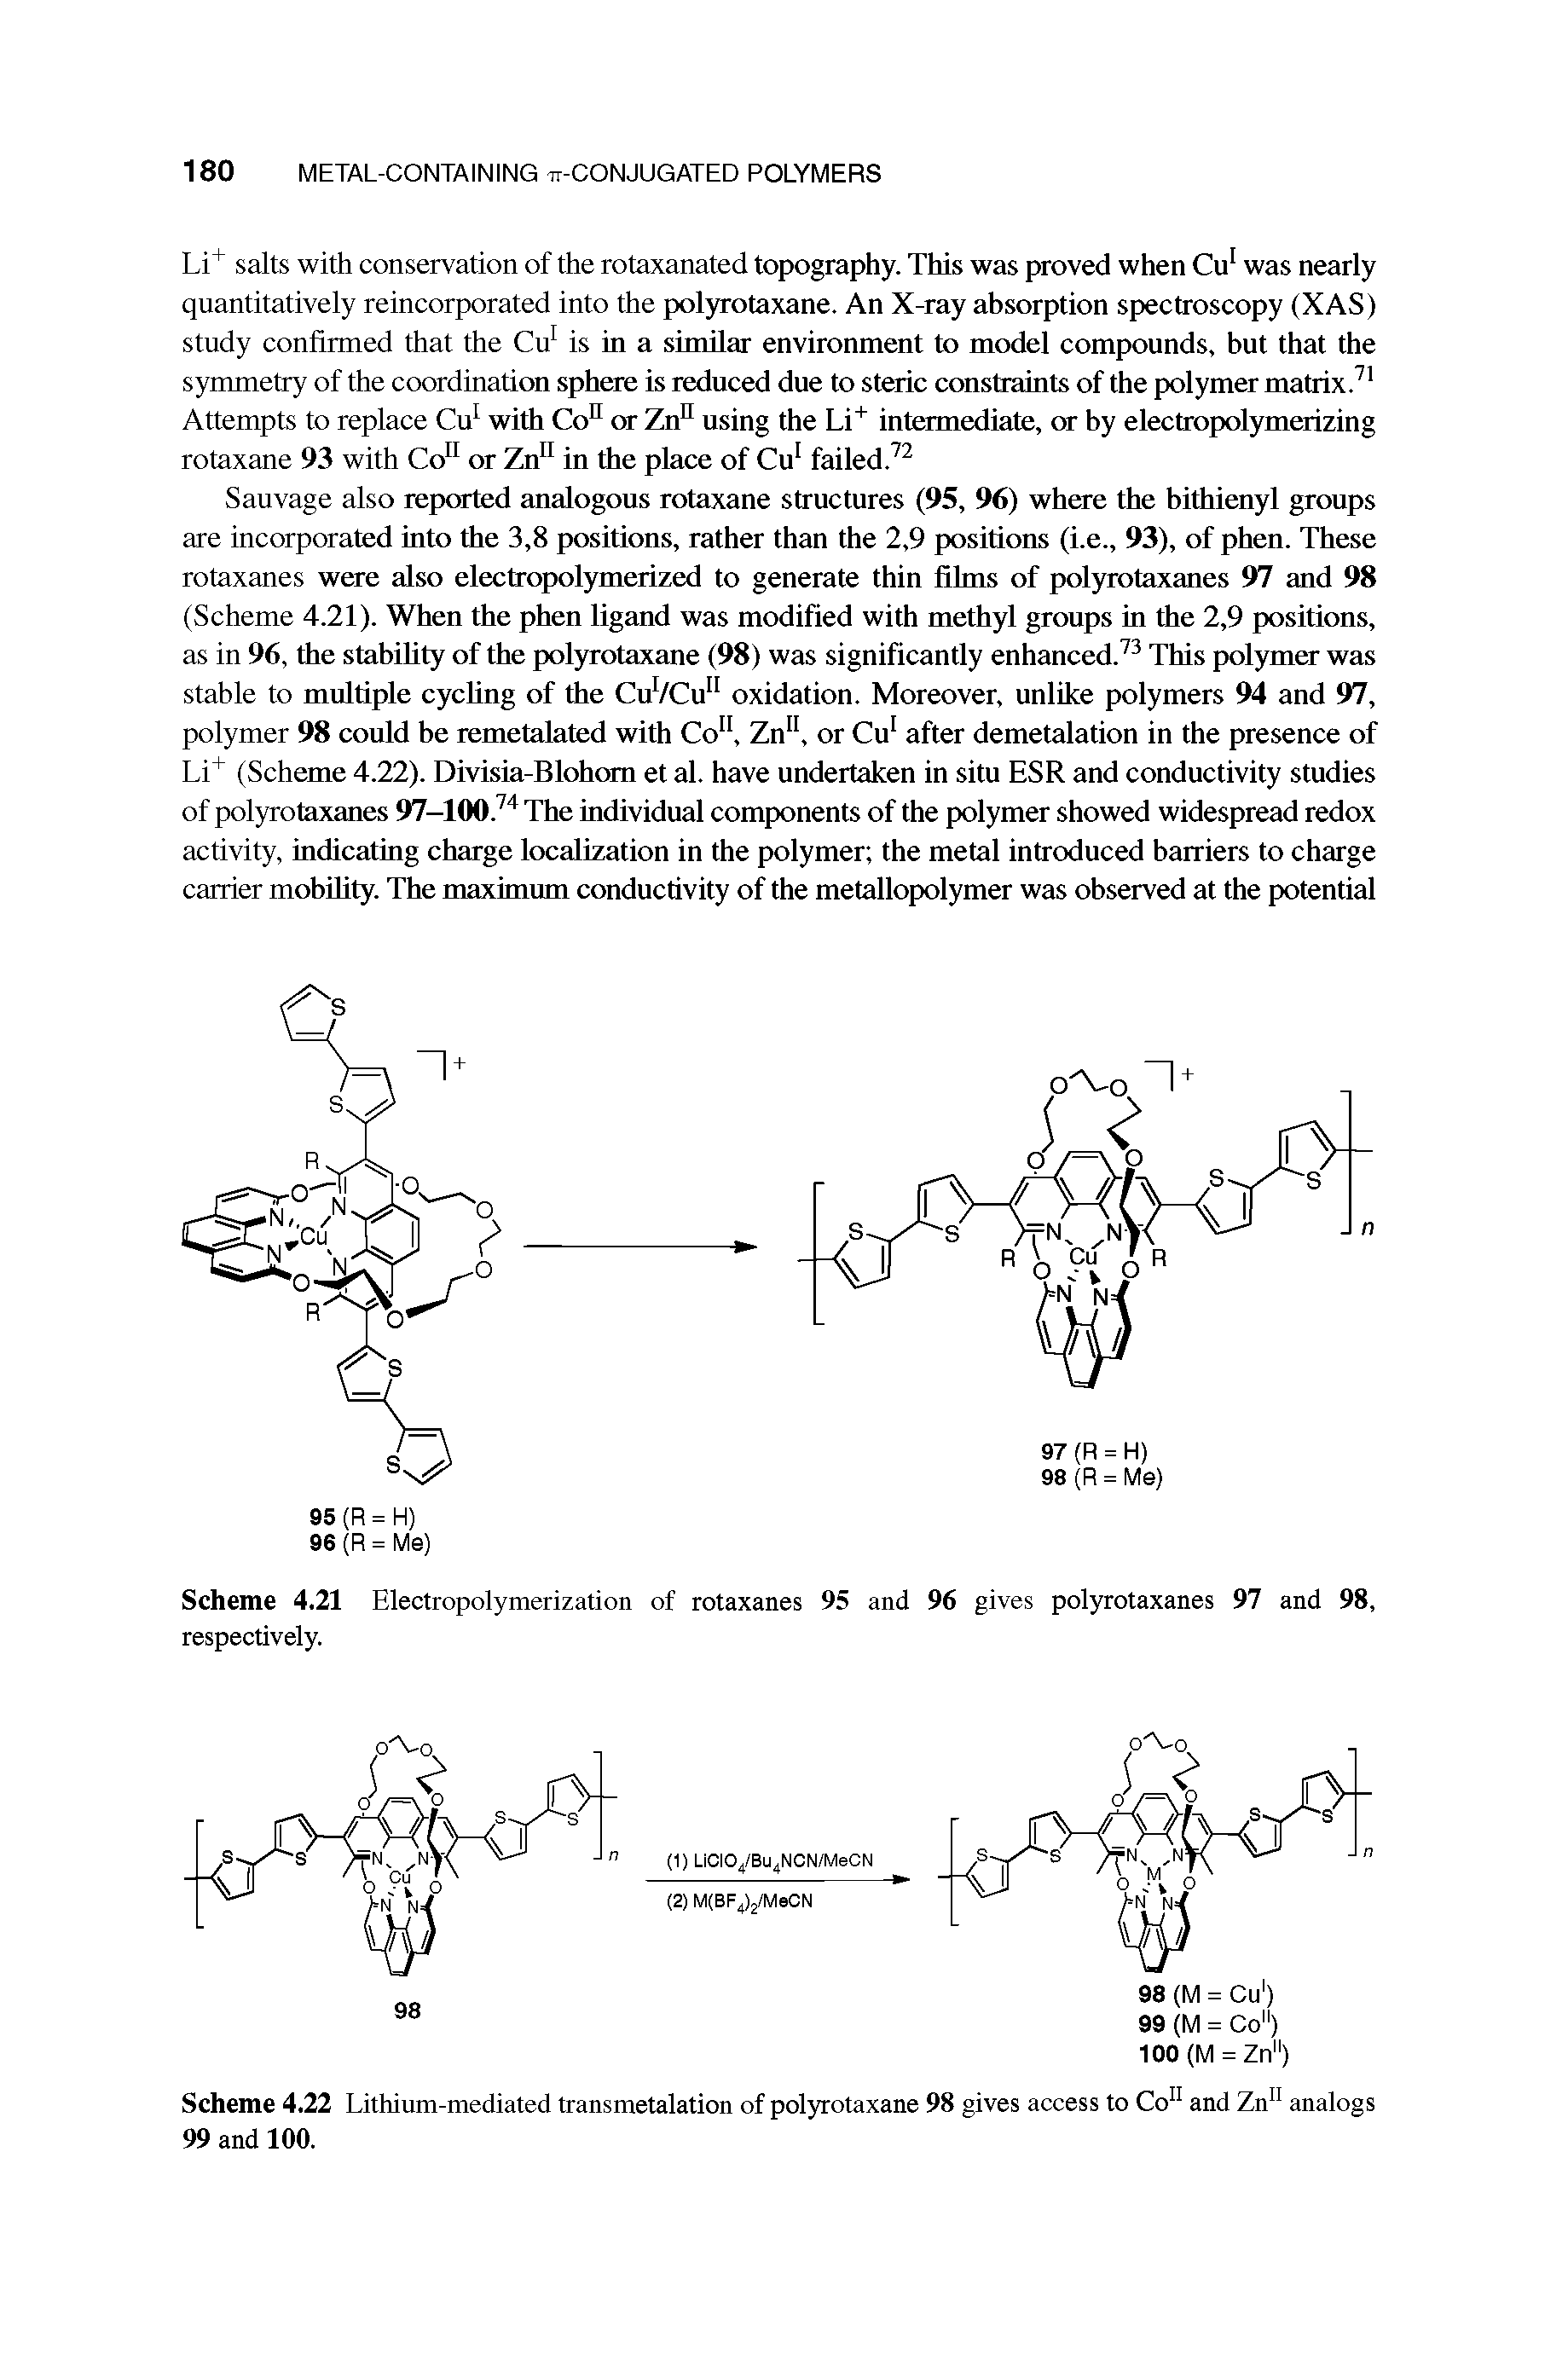 Scheme 4.22 Lithium-mediated transmetalation of polyrotaxane 98 gives access to Co11 and Zn11 analogs 99 and 100.